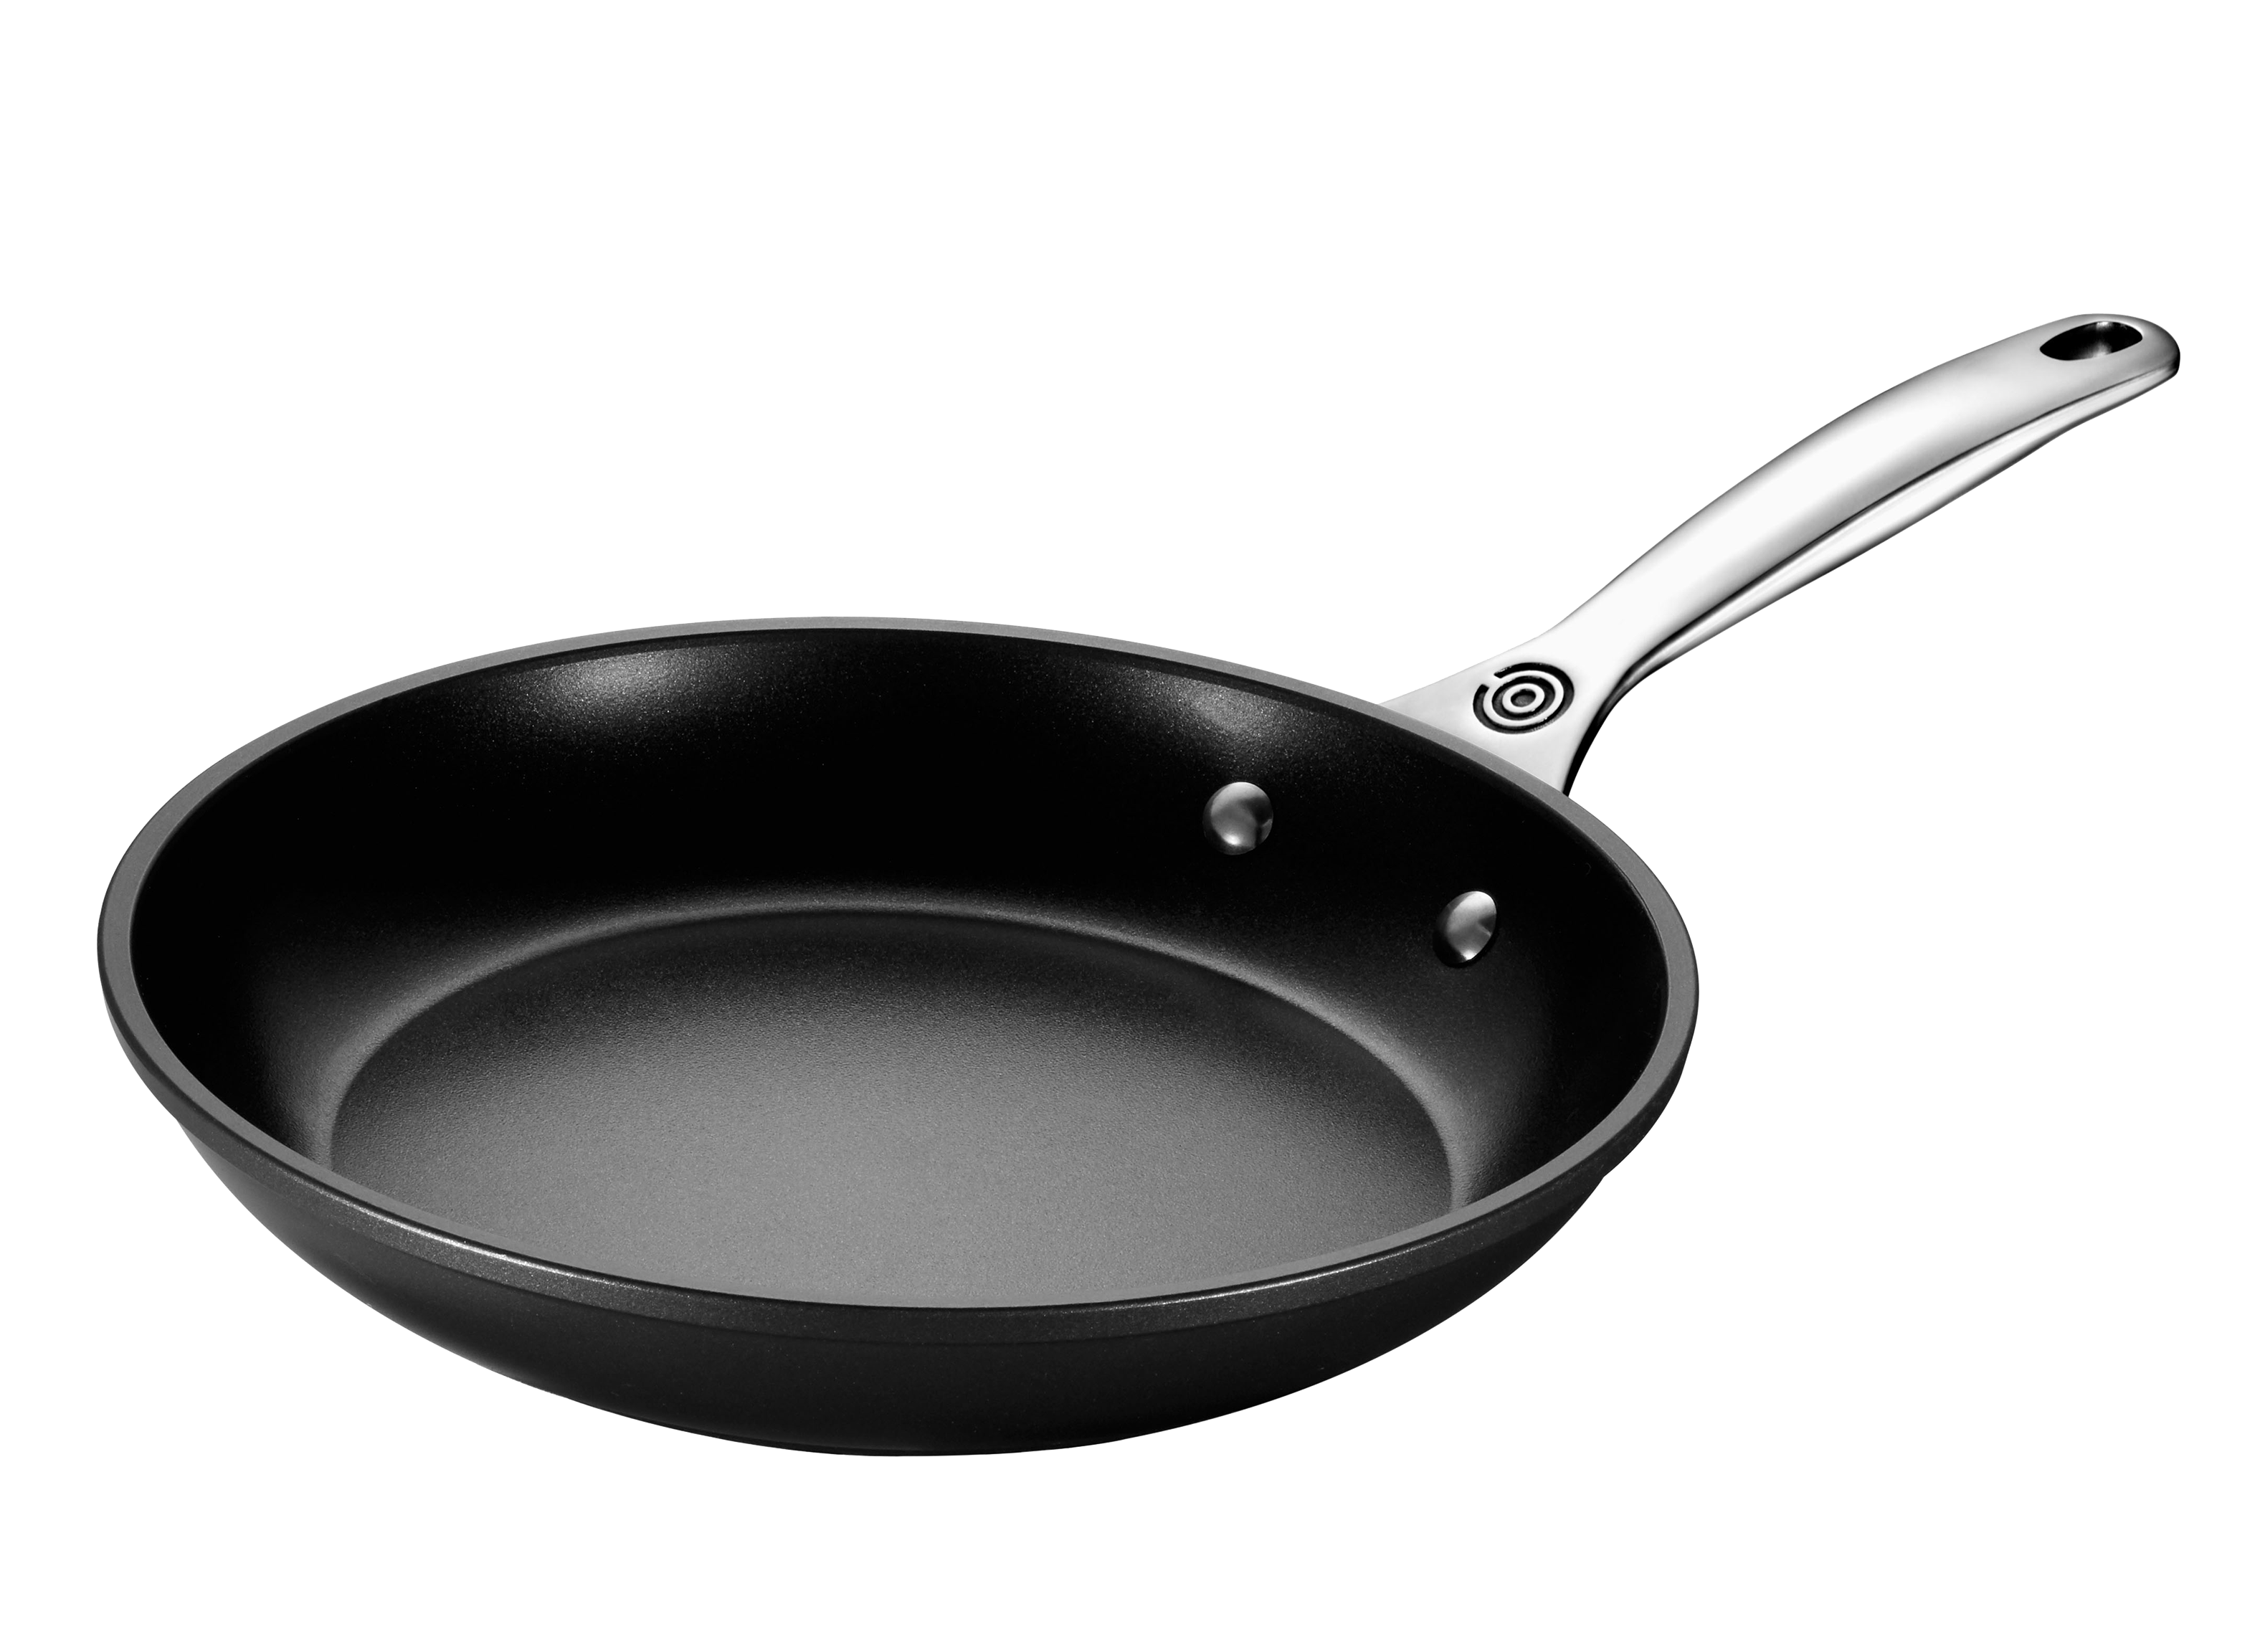 https://crdms.images.consumerreports.org/prod/products/cr/models/404678-frying-pans-nonstick-le-creuset-toughened-pro-10023928.png